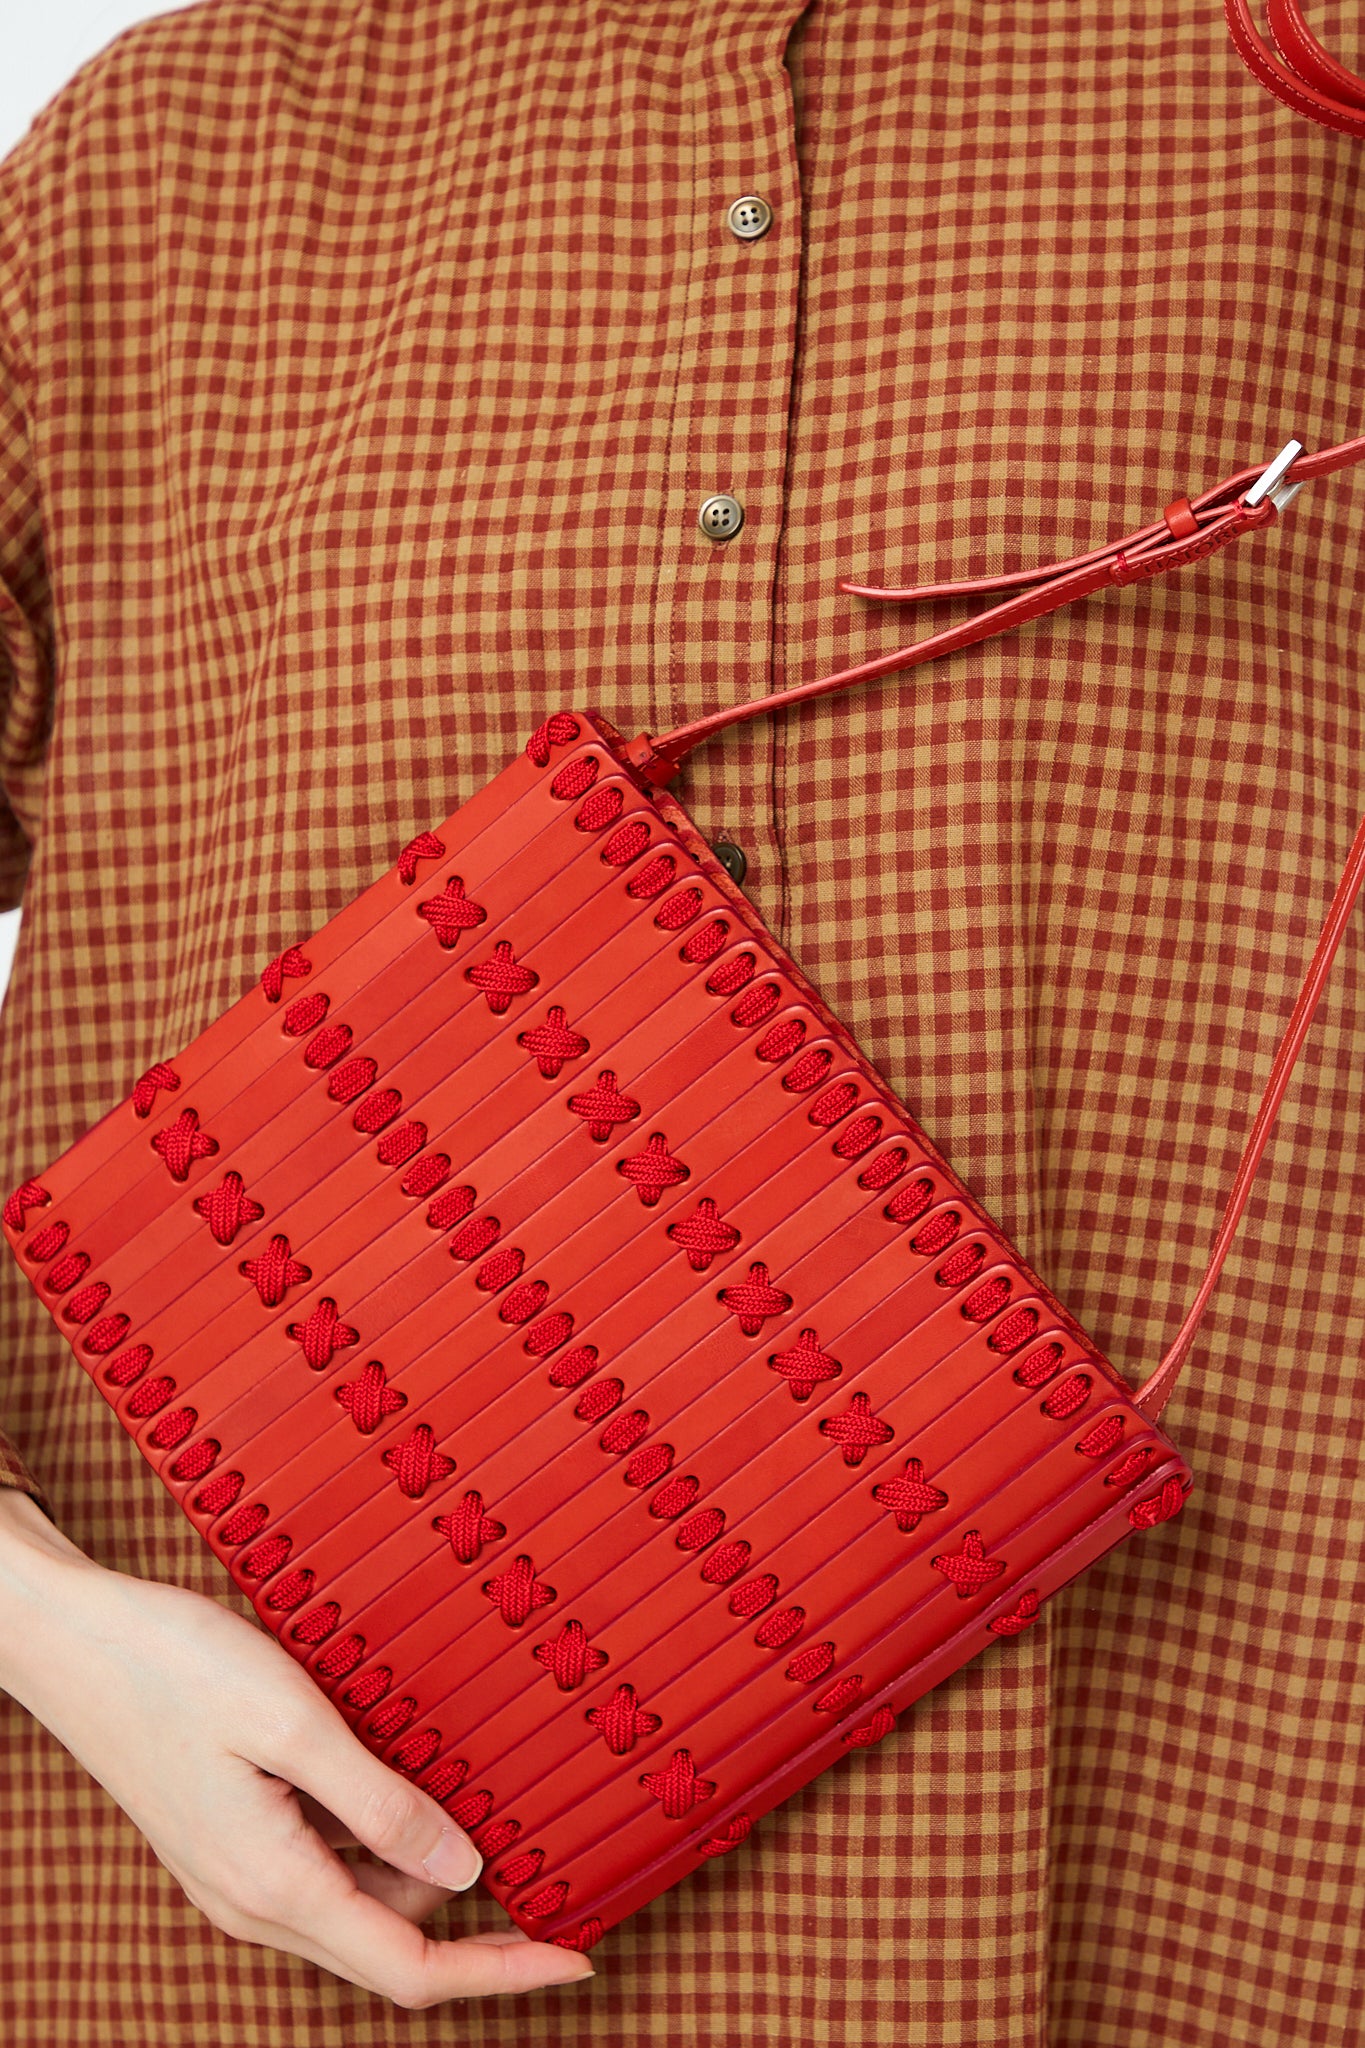 A woman is holding a Hatori handcrafted Crossbody Bag 46 in Amaranto and Ruby.